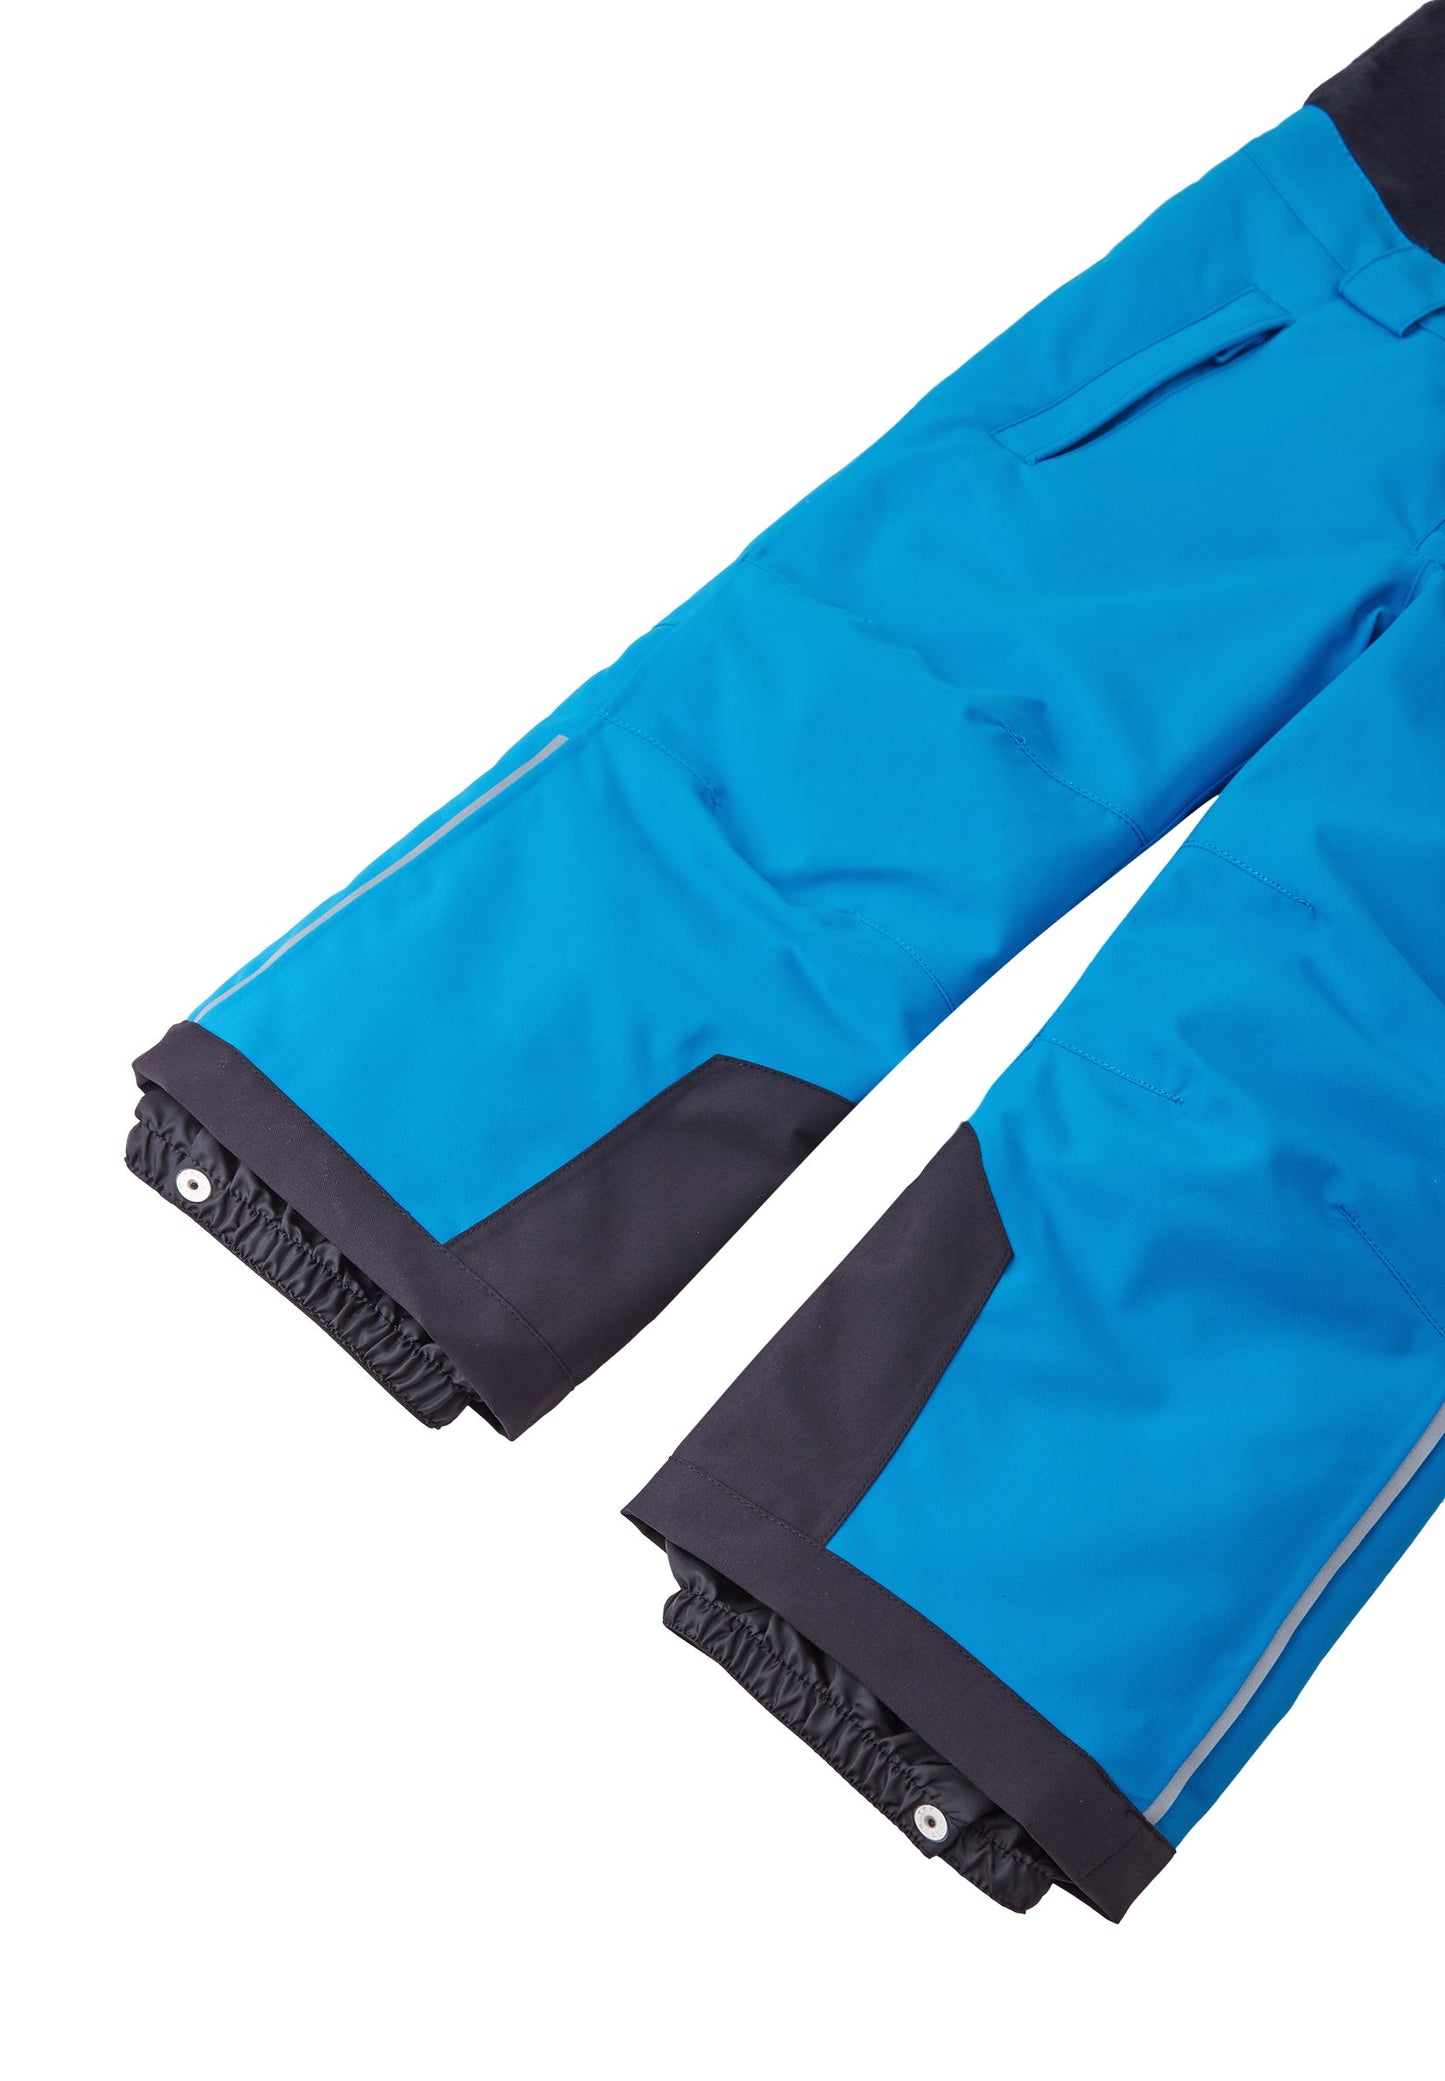 REIMA TECplus ski pants Oryon 522255 522271 <br>with warming fleece stretch top <br>Size 104, 110, 116, 122, 128 <br>Snow skirt at the leg end<br> 100% waterproof, breathable, windproof